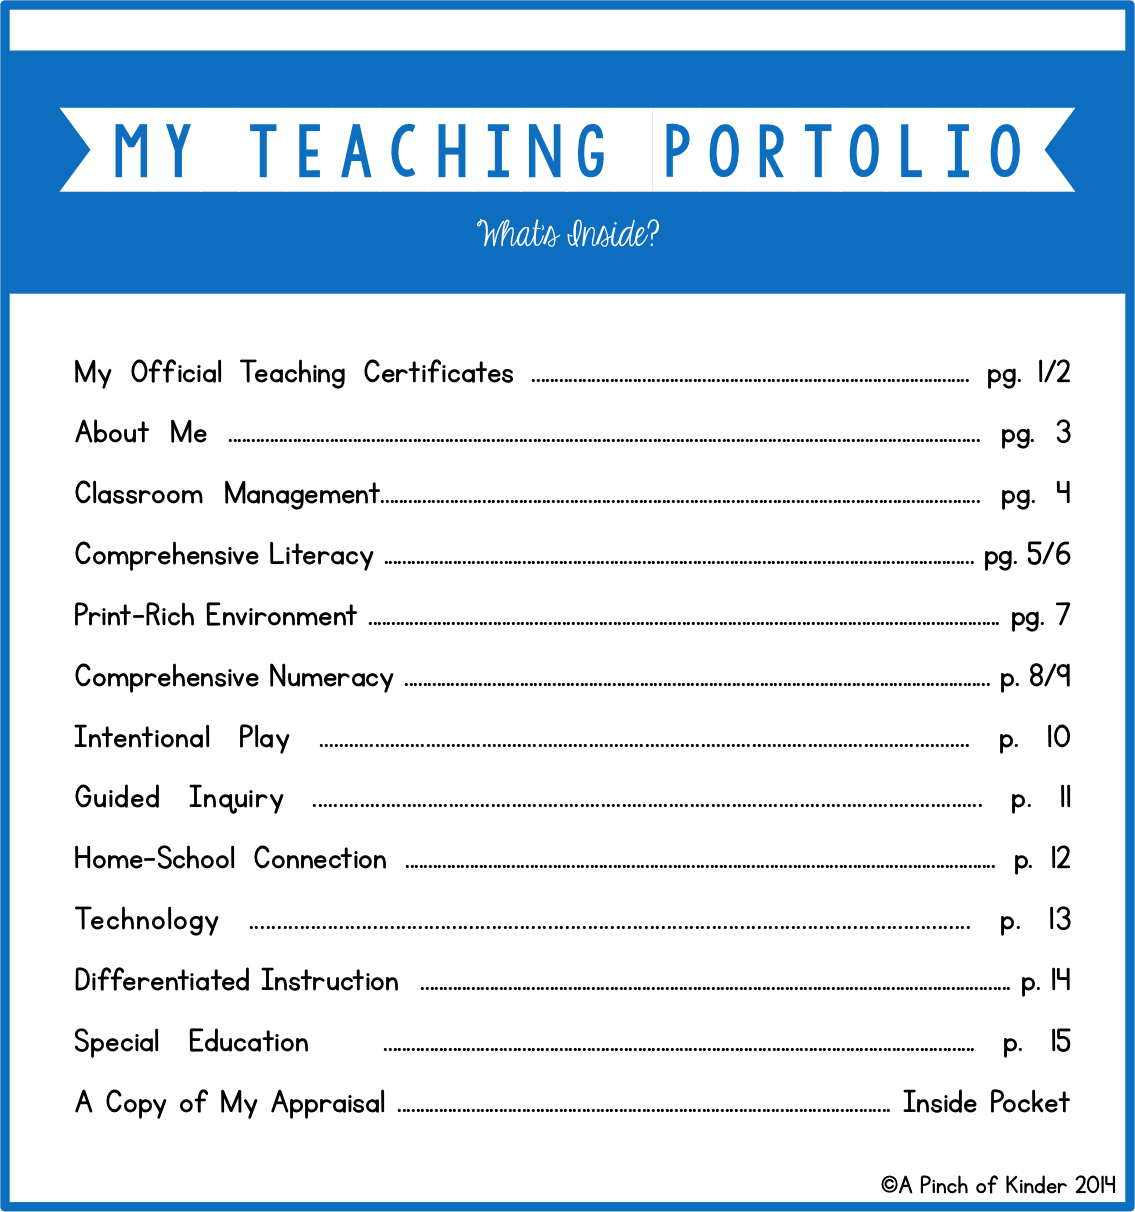 portfolio cover page education template free word download